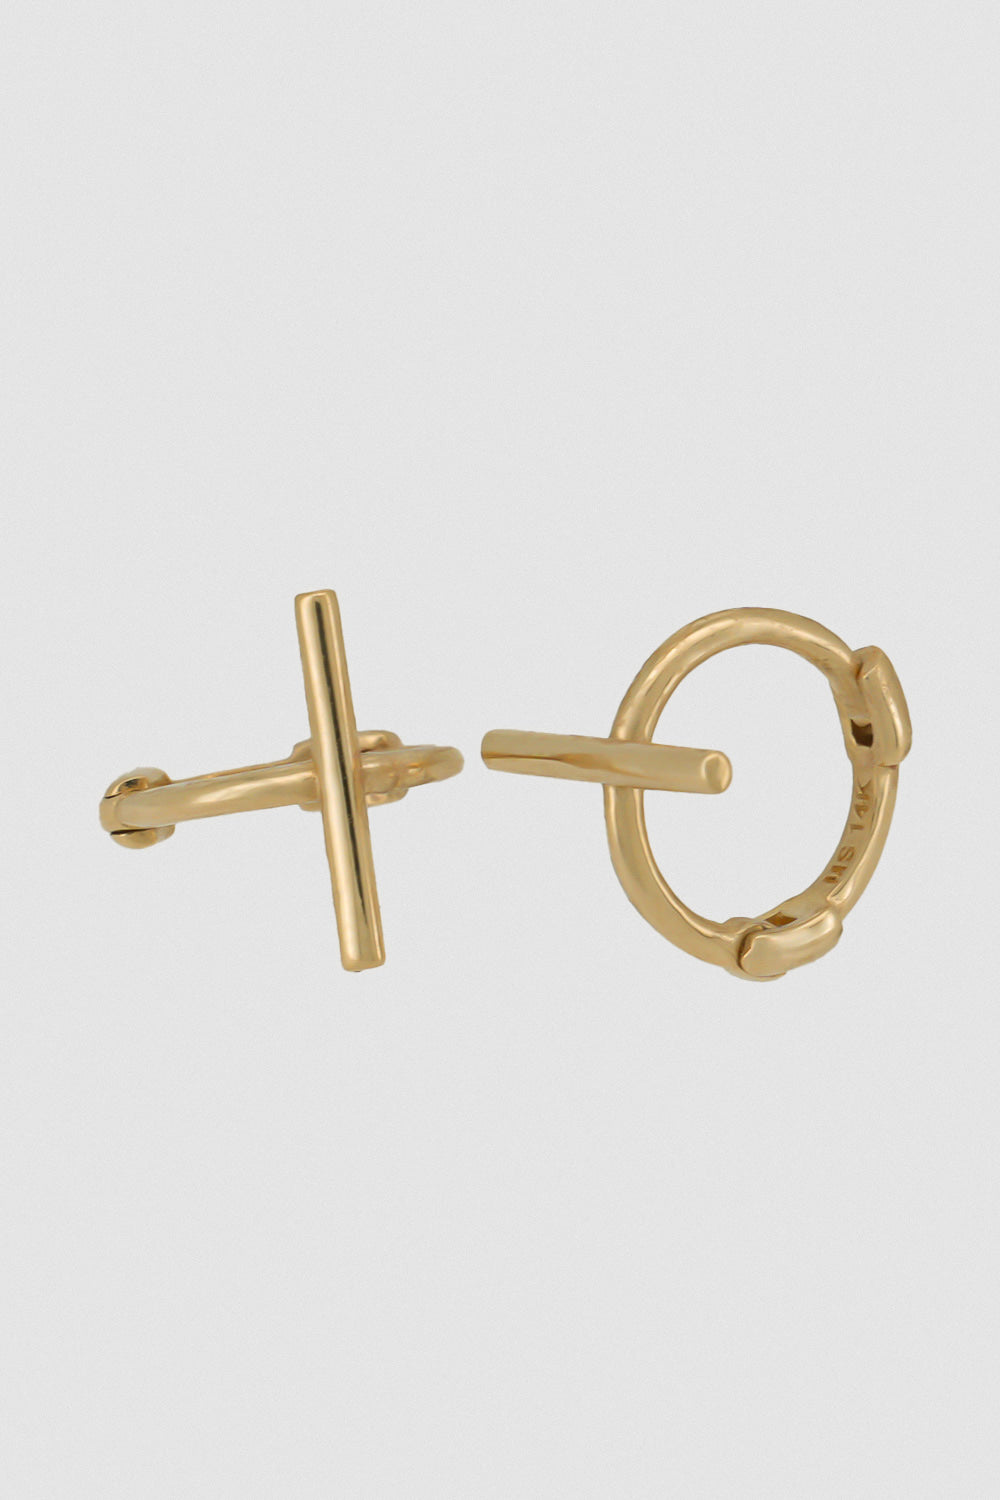 14k tina stick one touch earrings (1 pair)